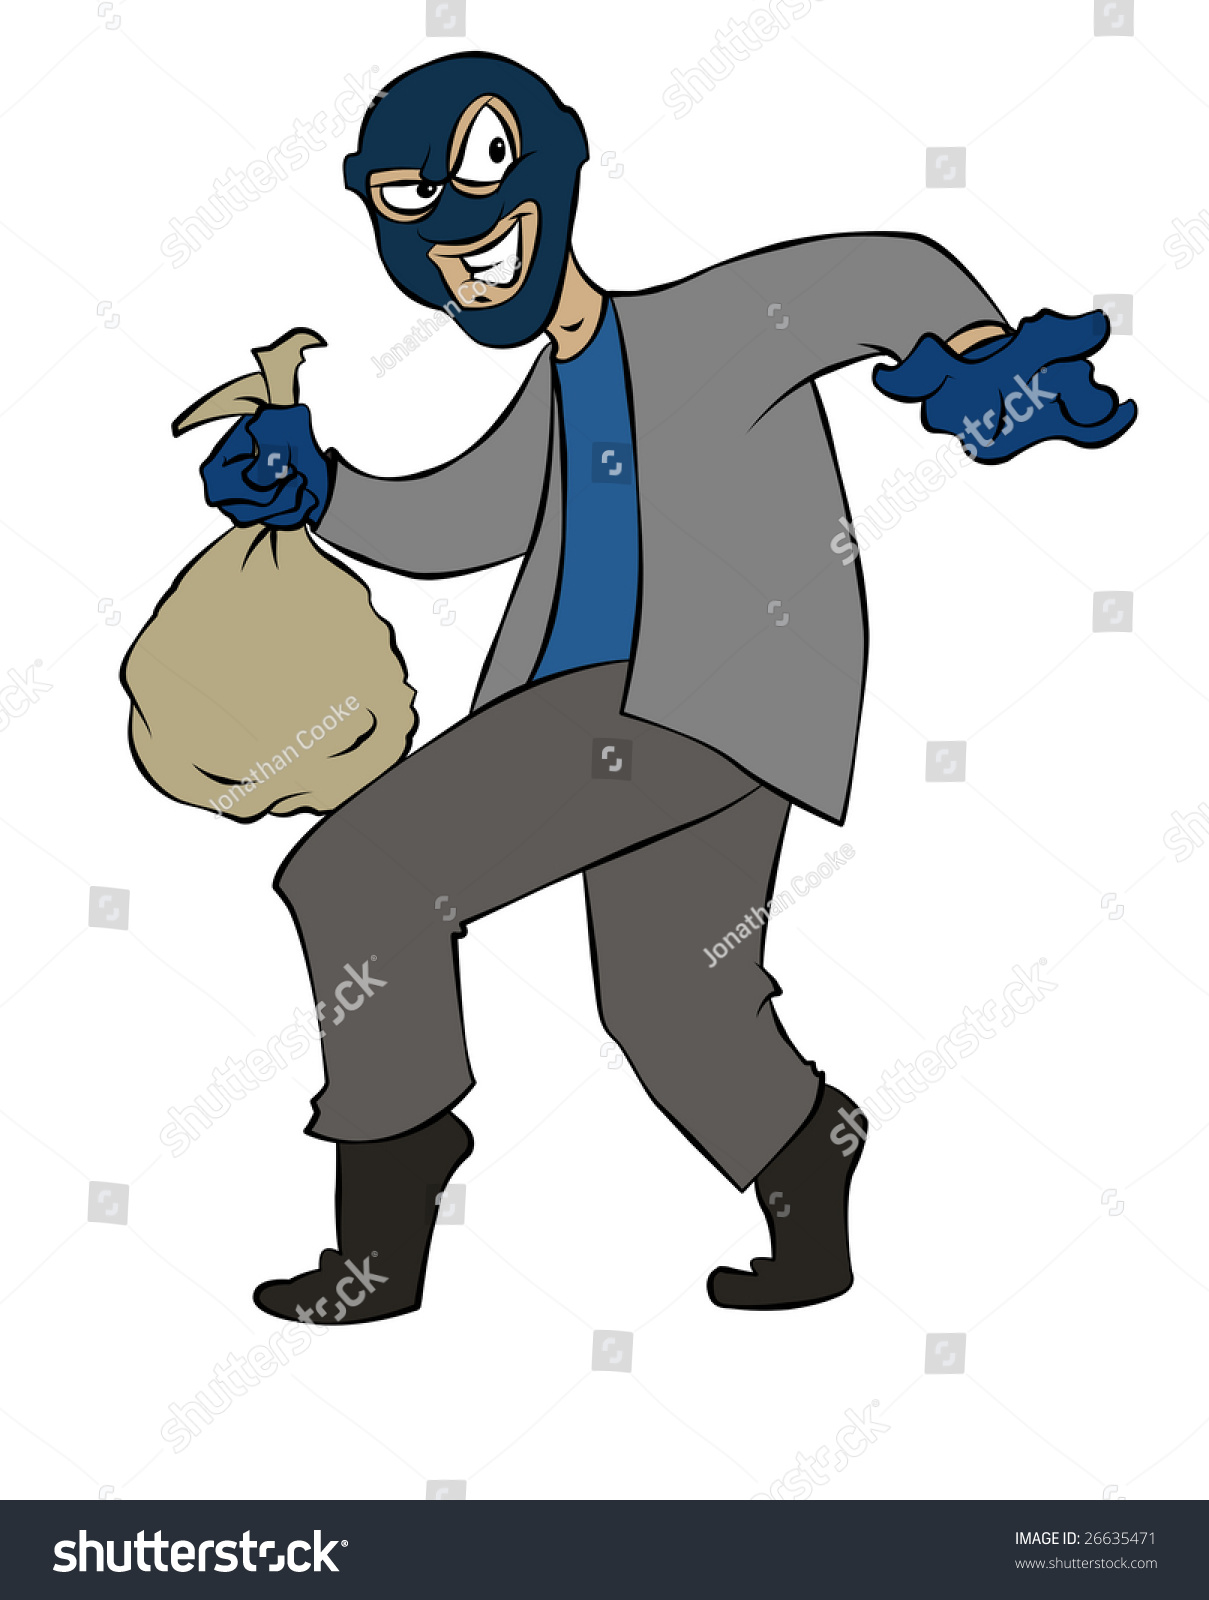 A Sneaky Cartoon Thief Making Off With Some Loot. Stock Photo 26635471